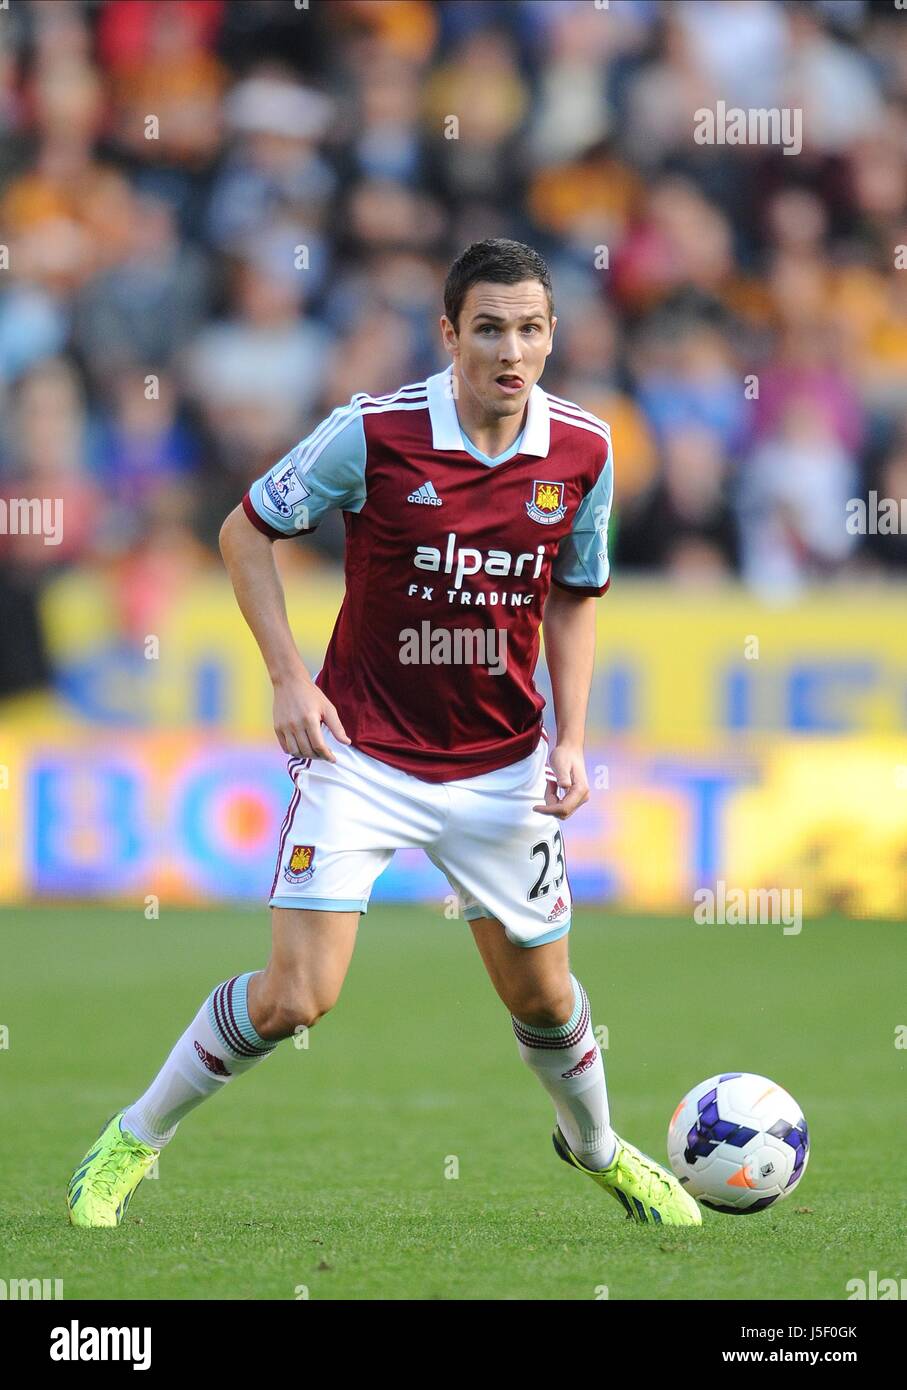 STEWART DOWNING, West Ham United FC Stade KC HULL ANGLETERRE 28 Septembre 2013 Banque D'Images